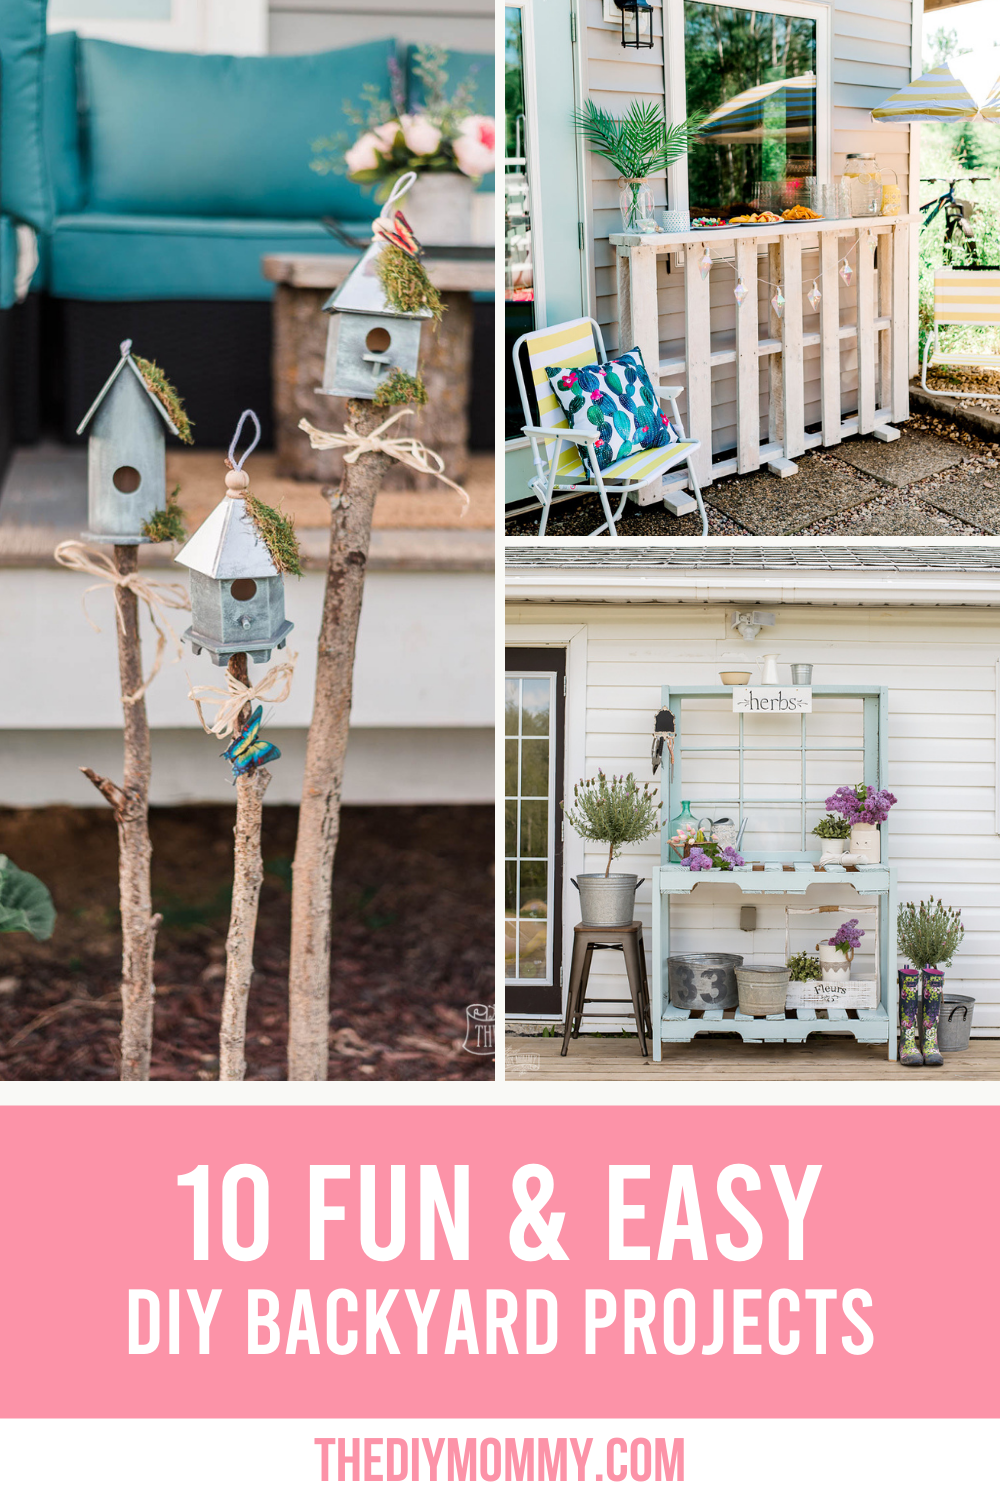 10 Fun Easy Diy Backyard Projects The Mommy